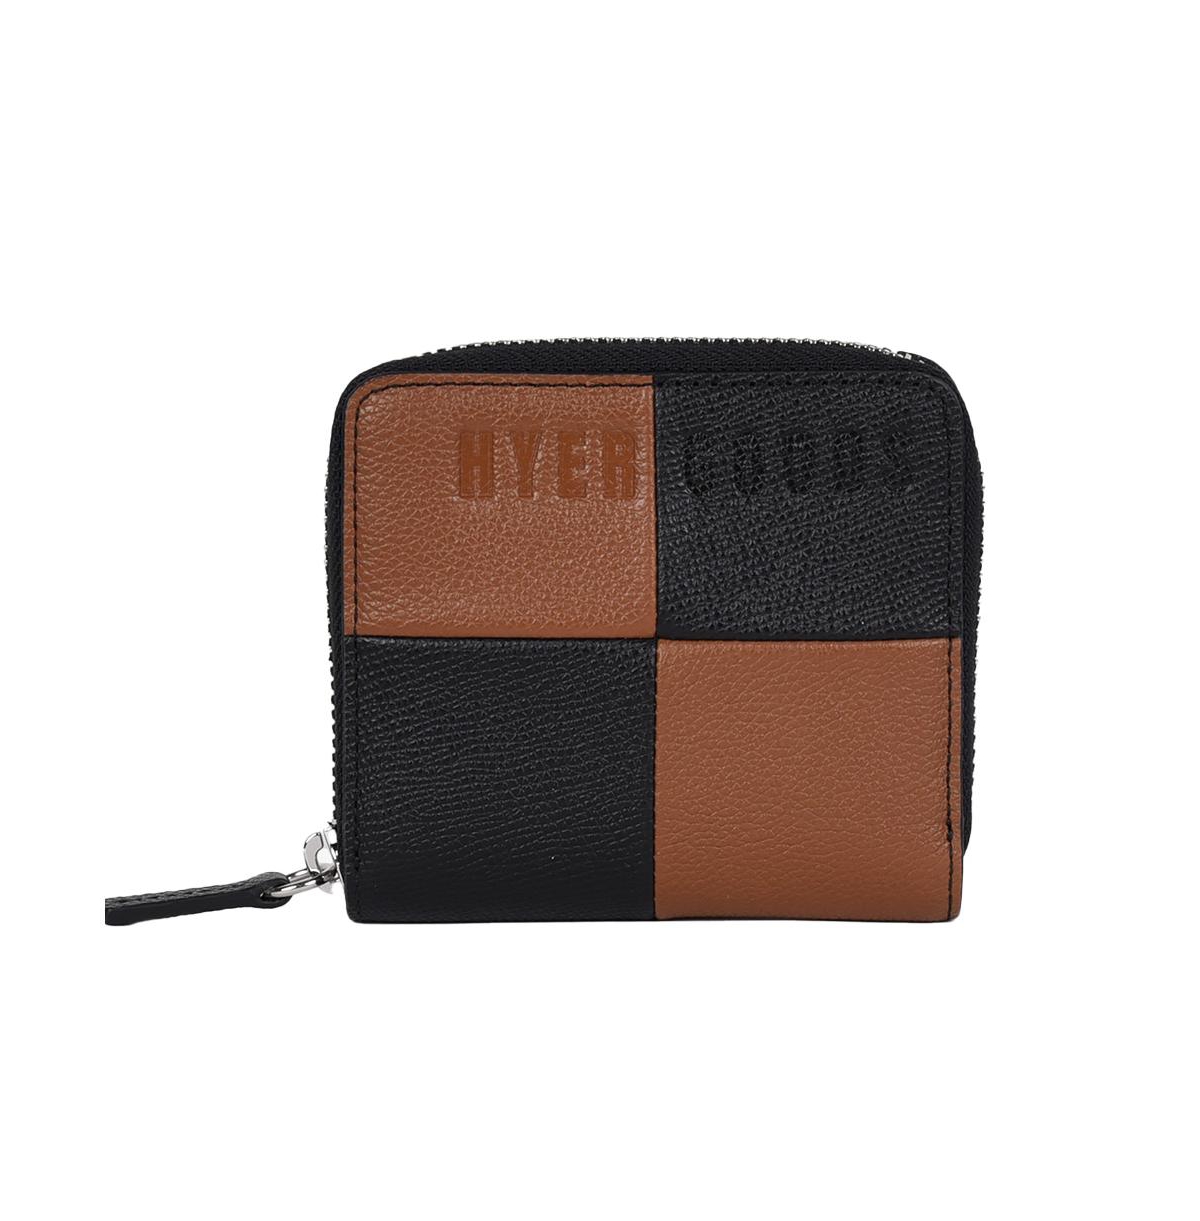 HYER GOODS UPCYCLED LEATHER ZIP WALLET COGNAC CHECK